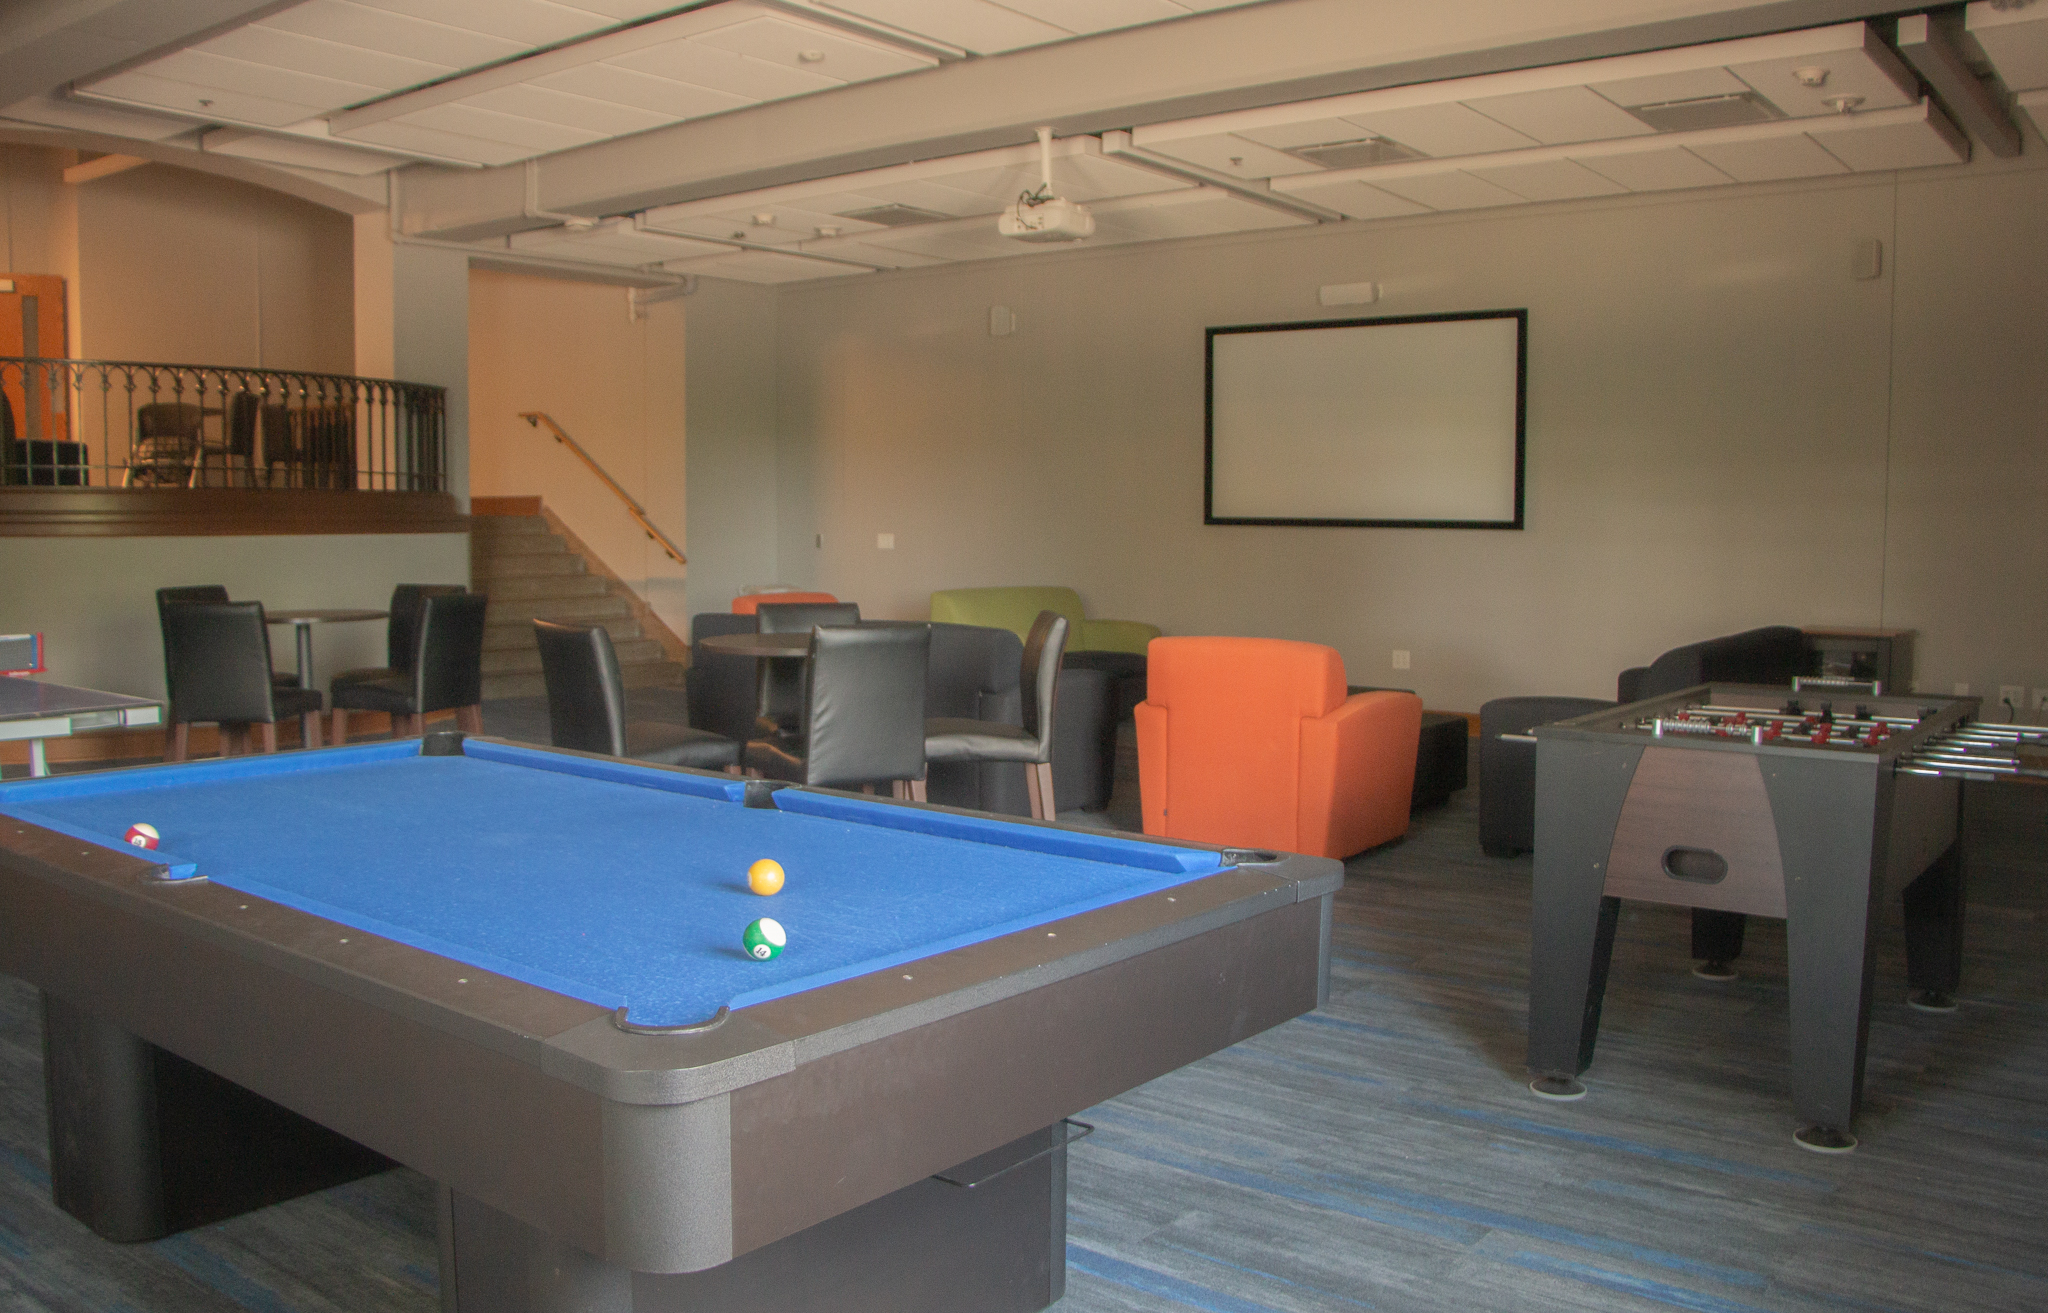 Delzell Game room with pool table, foosball table and seating areas.